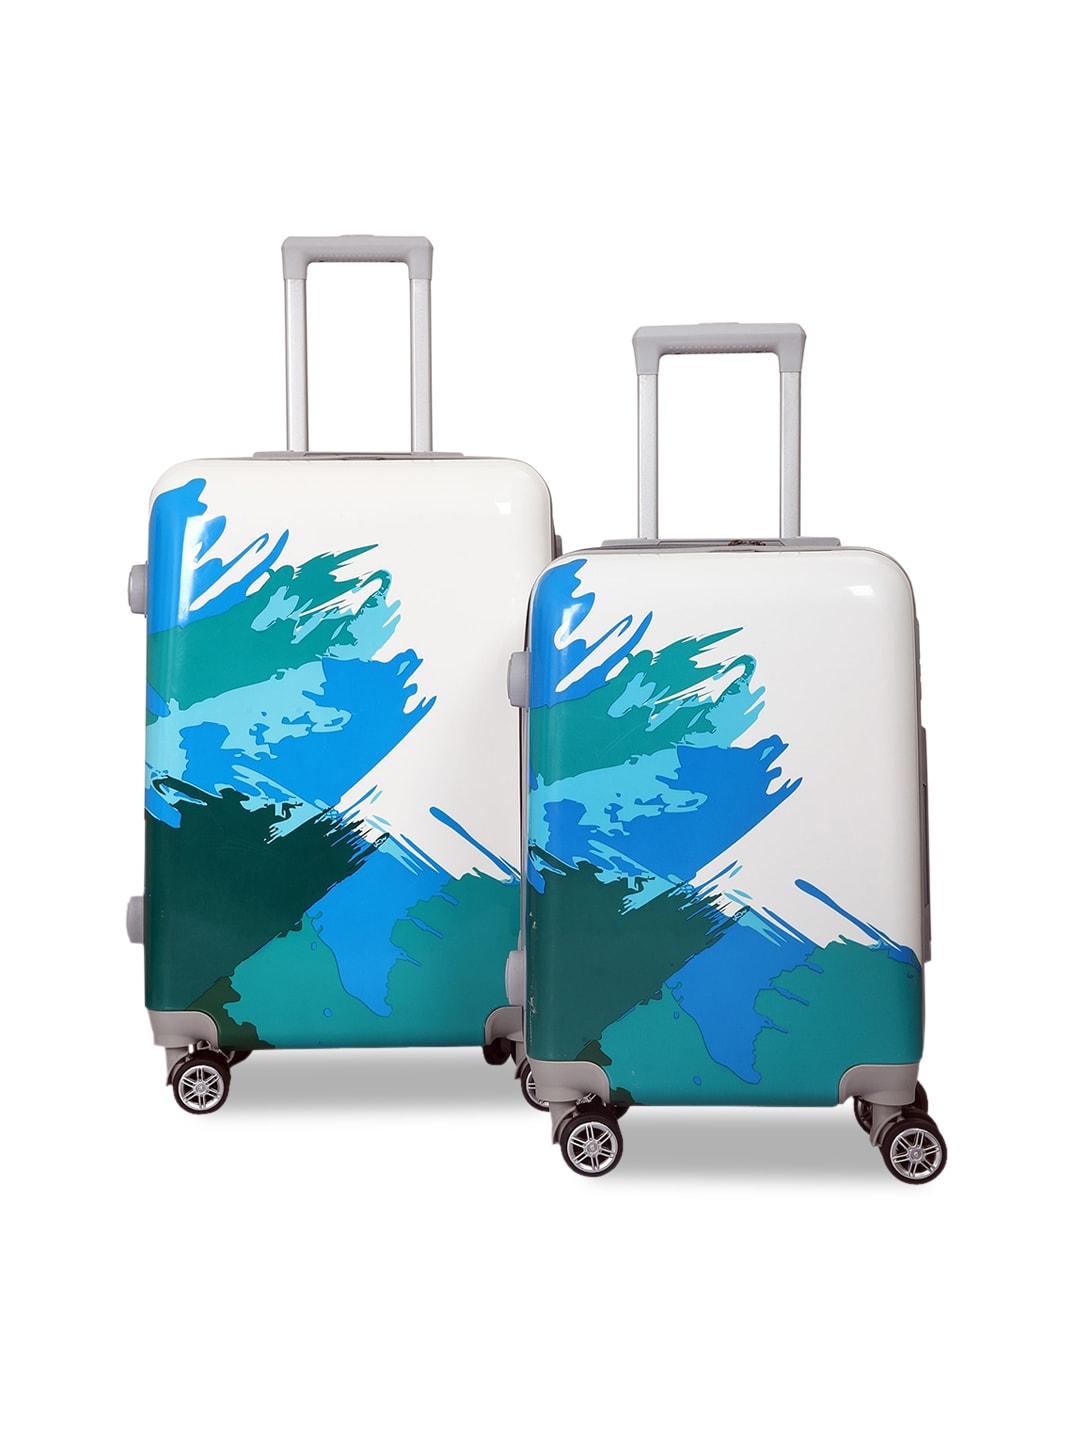 polo class set of 2 blue & white hard-sided trolley suitcases